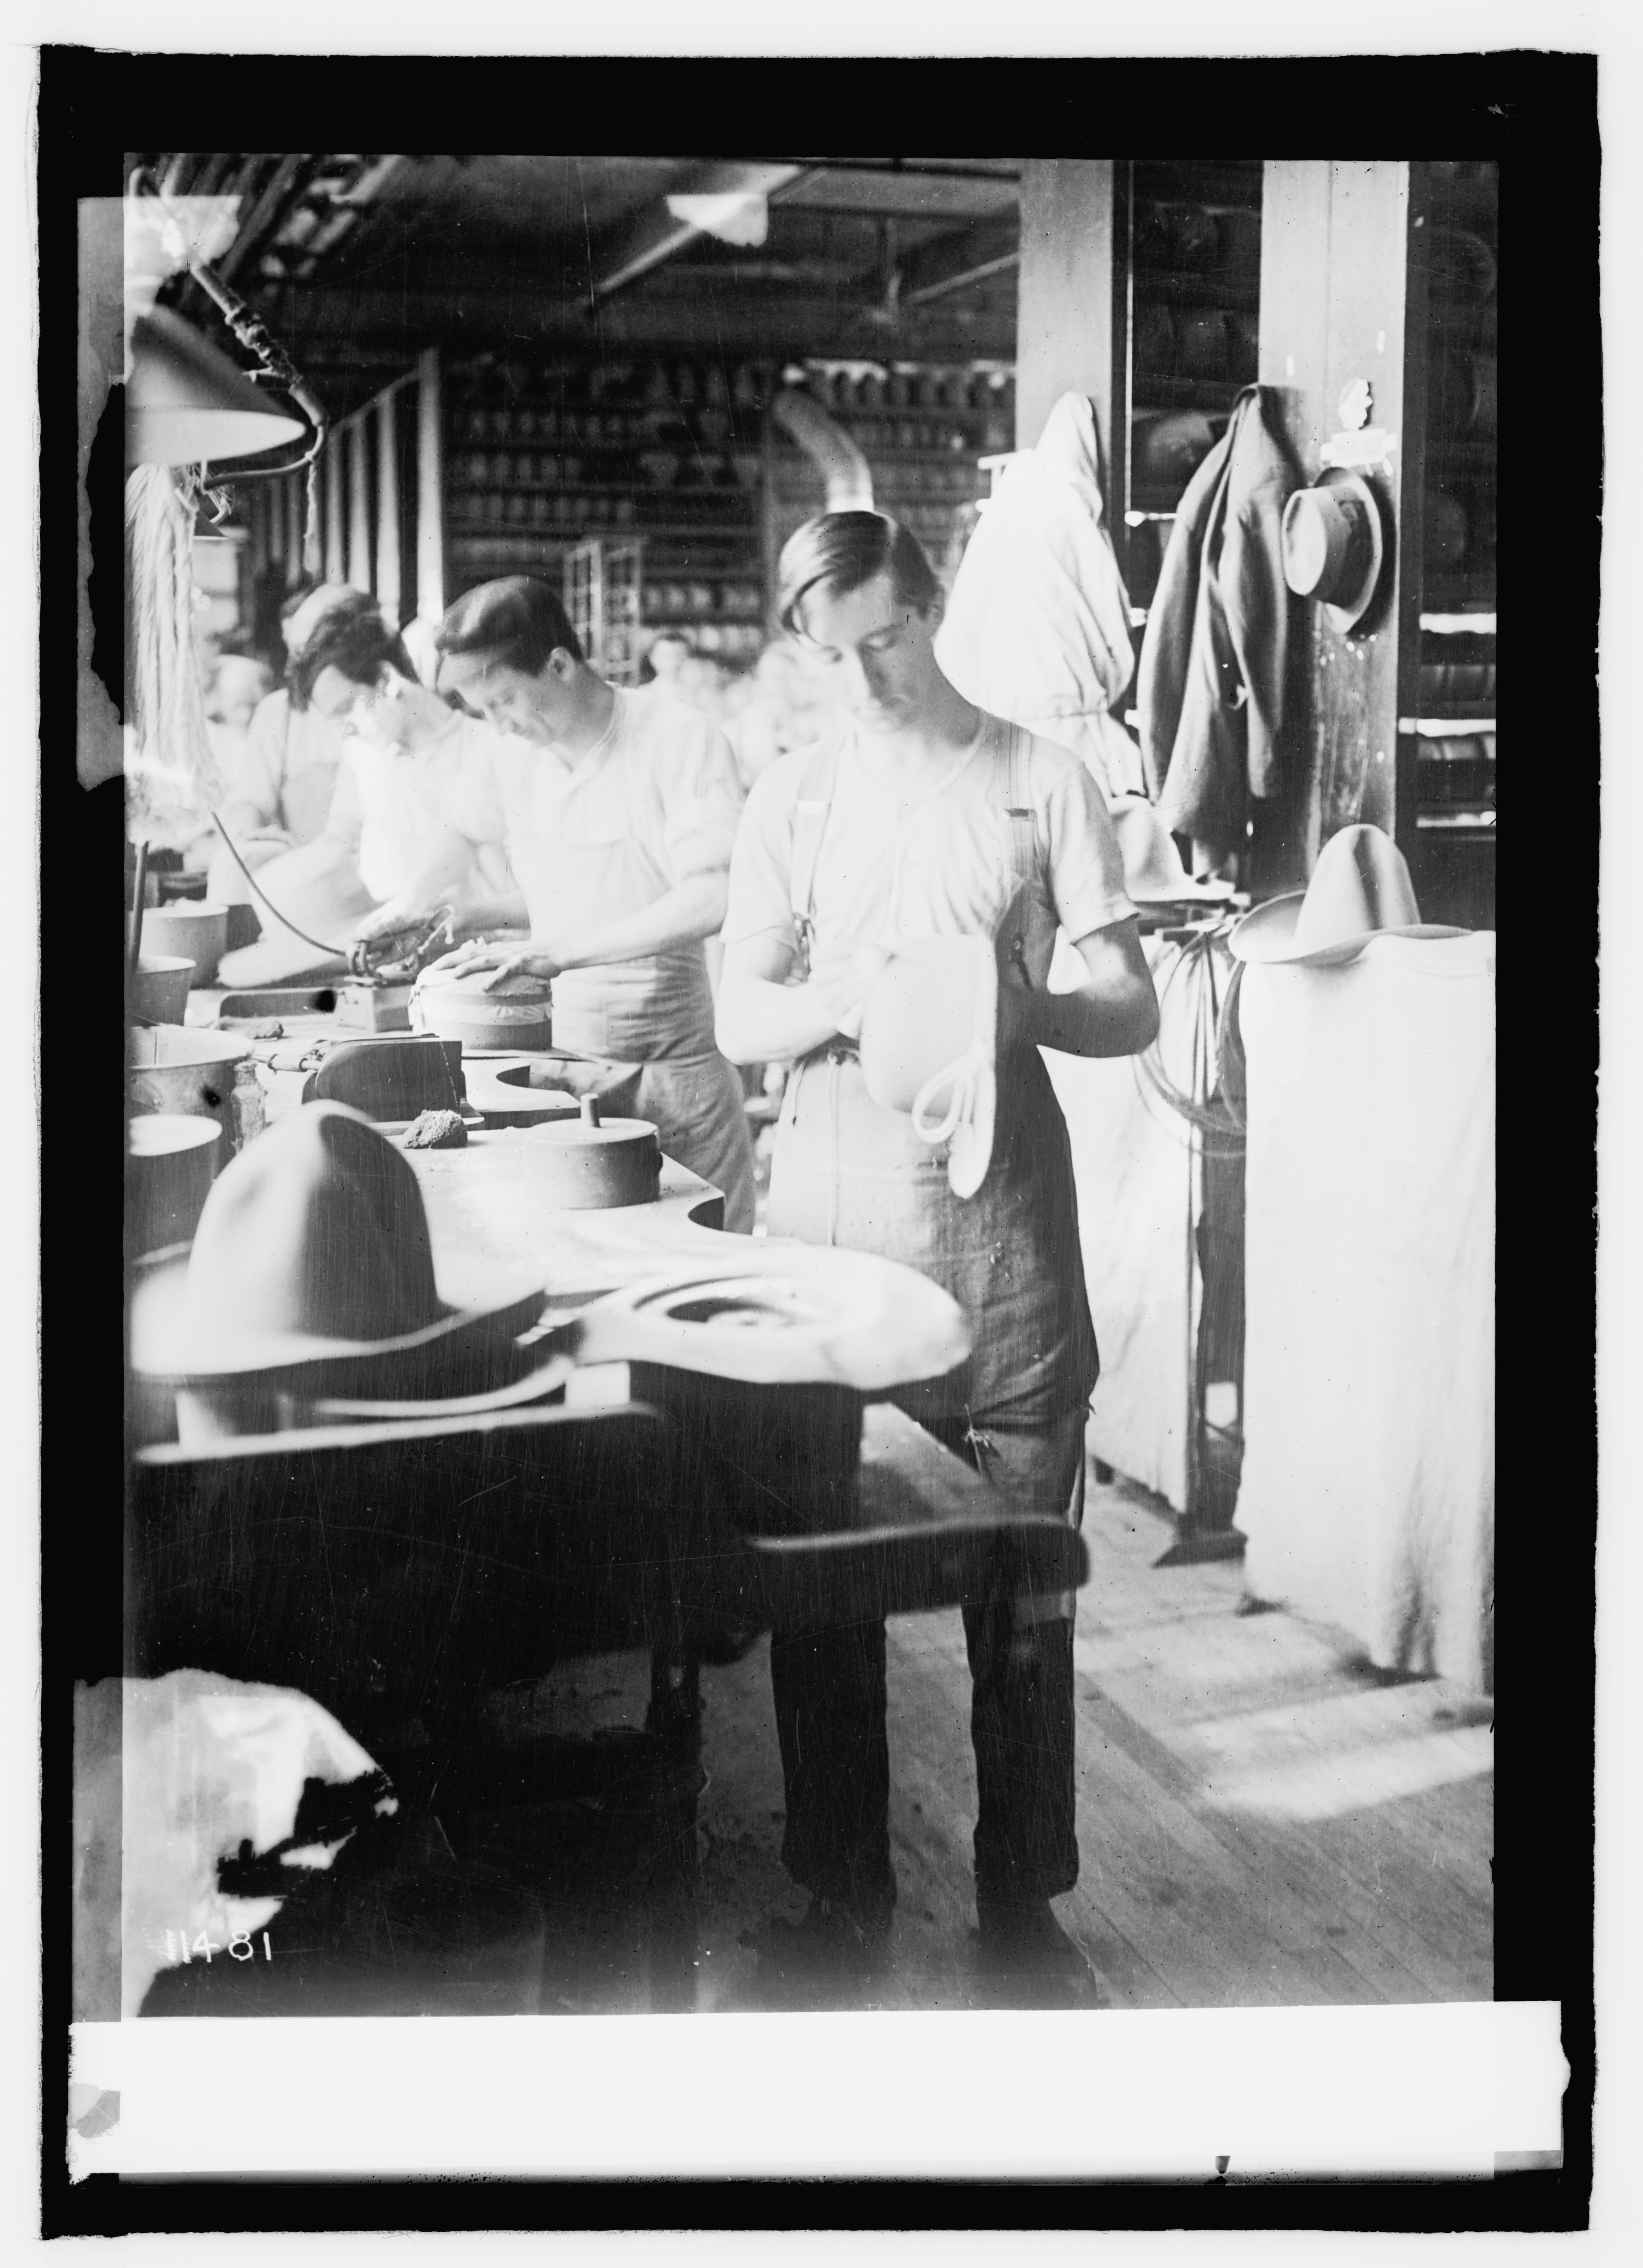 Stetson workers making U.S. Army Hats